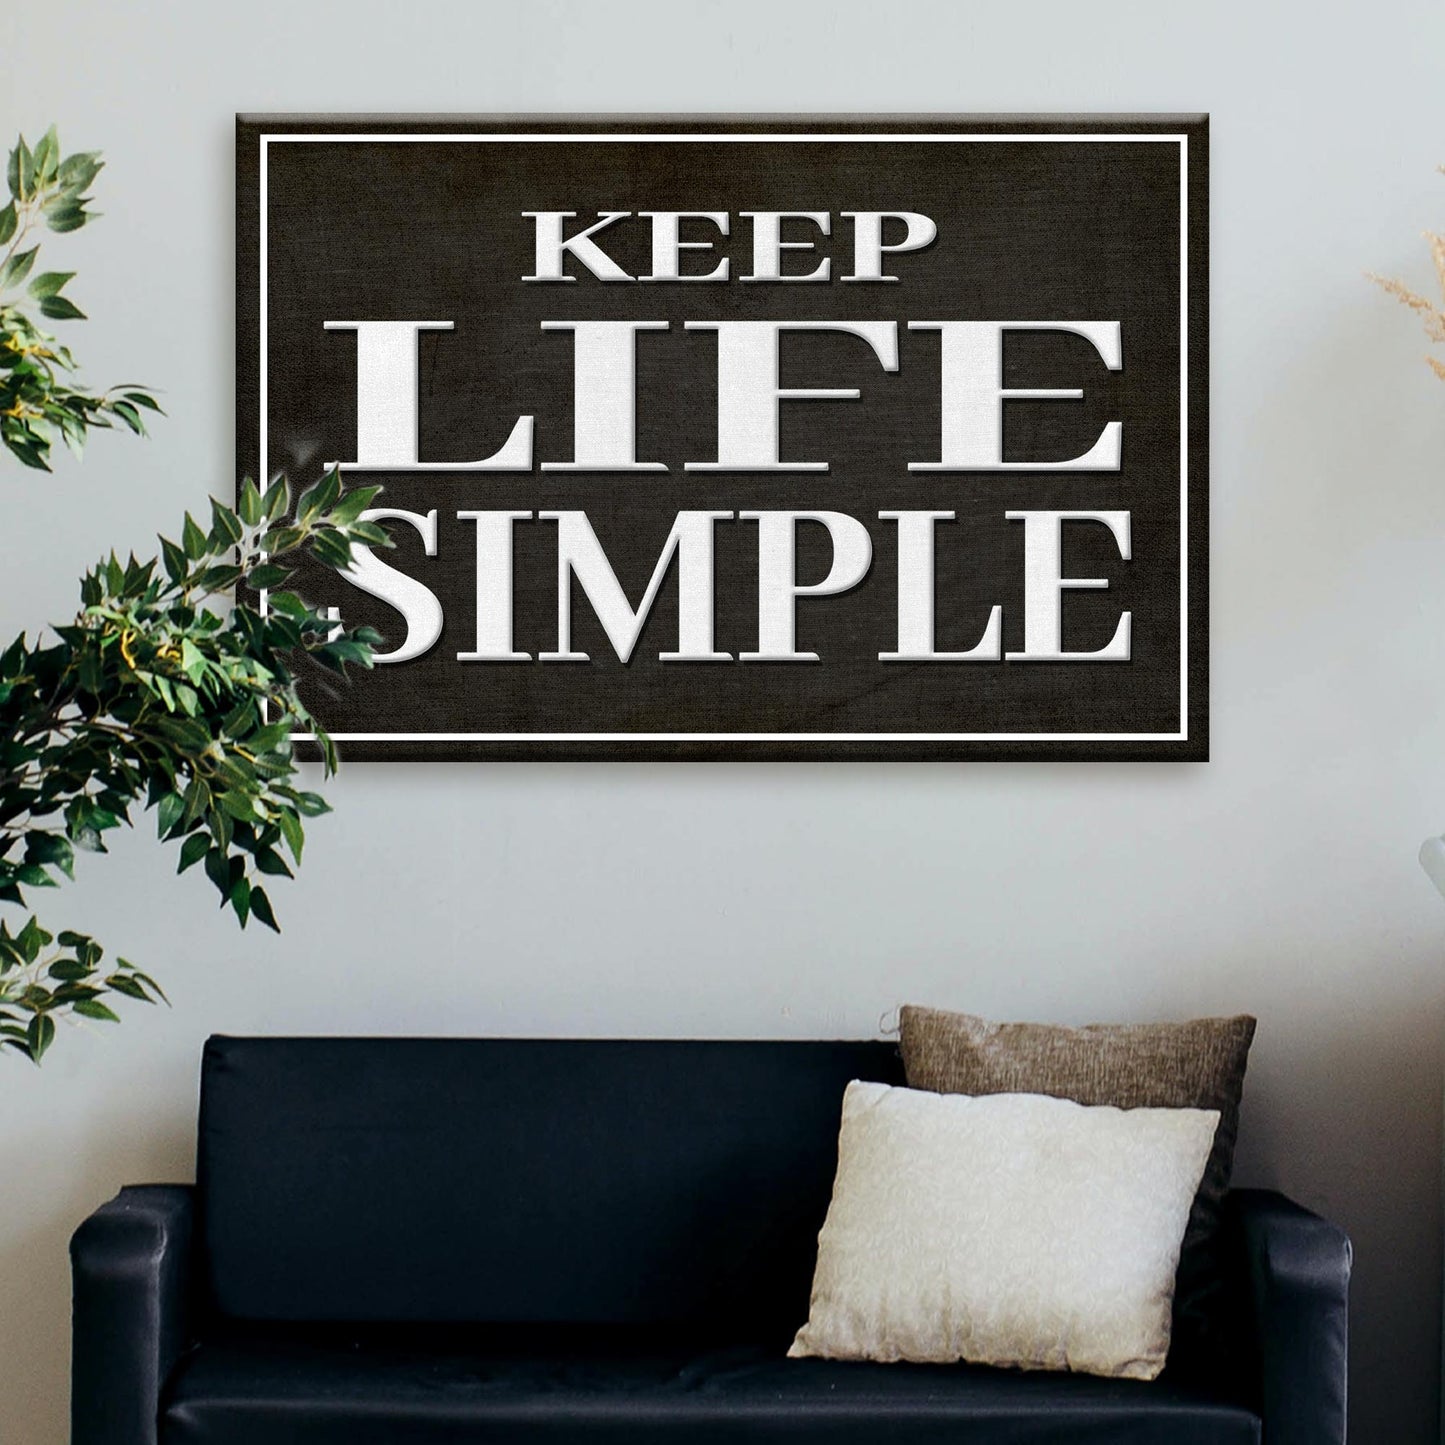 Keep Life Simple Sign - Image by Tailored Canvases